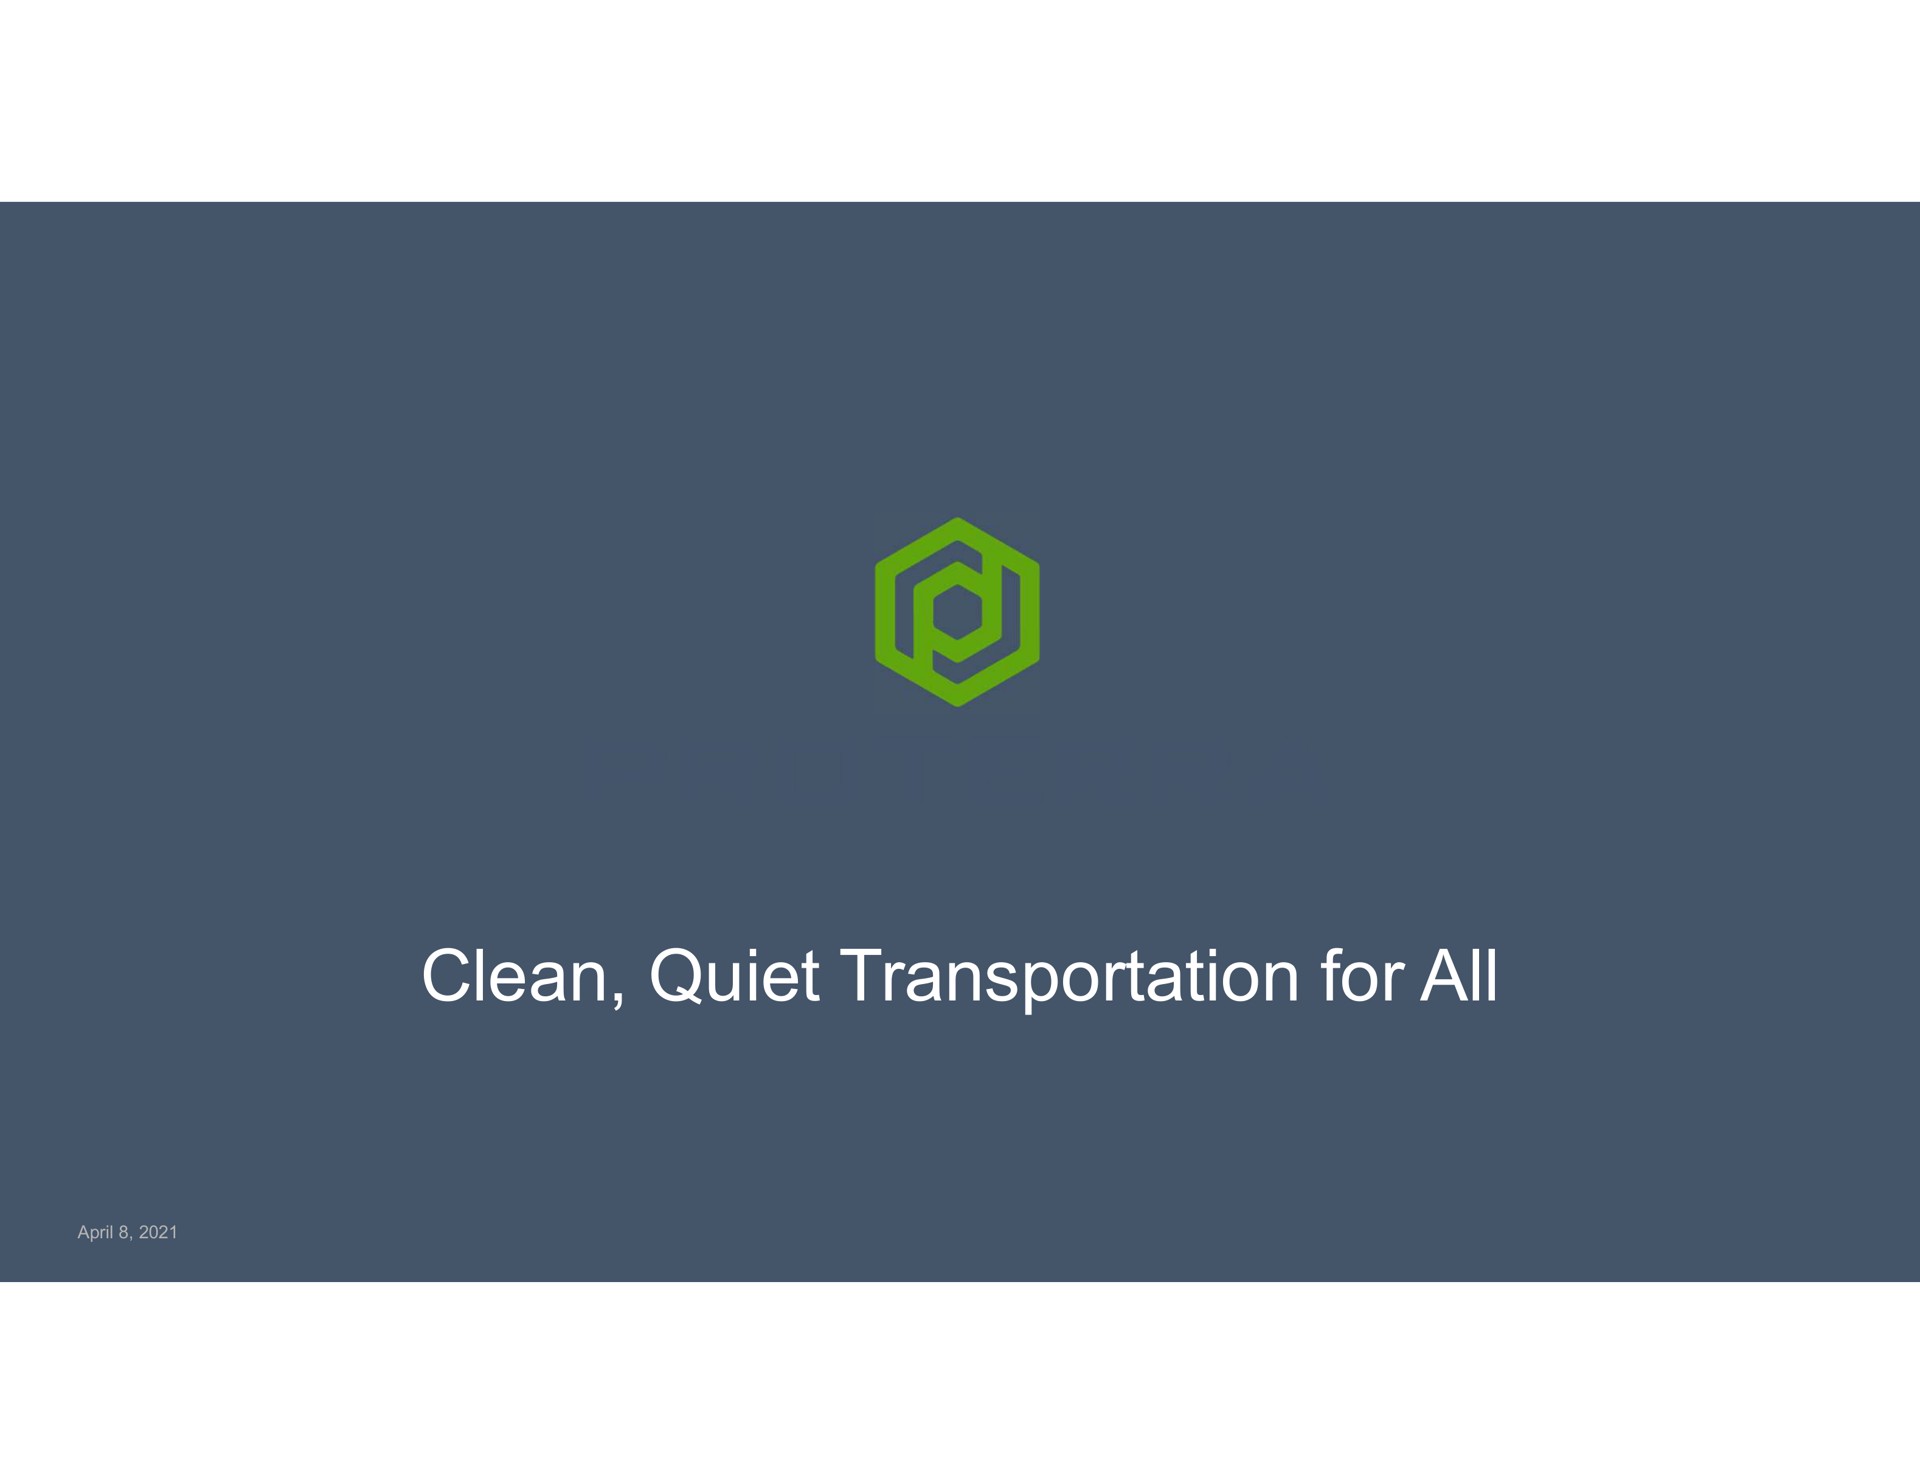 clean quiet transportation for all | Proterra